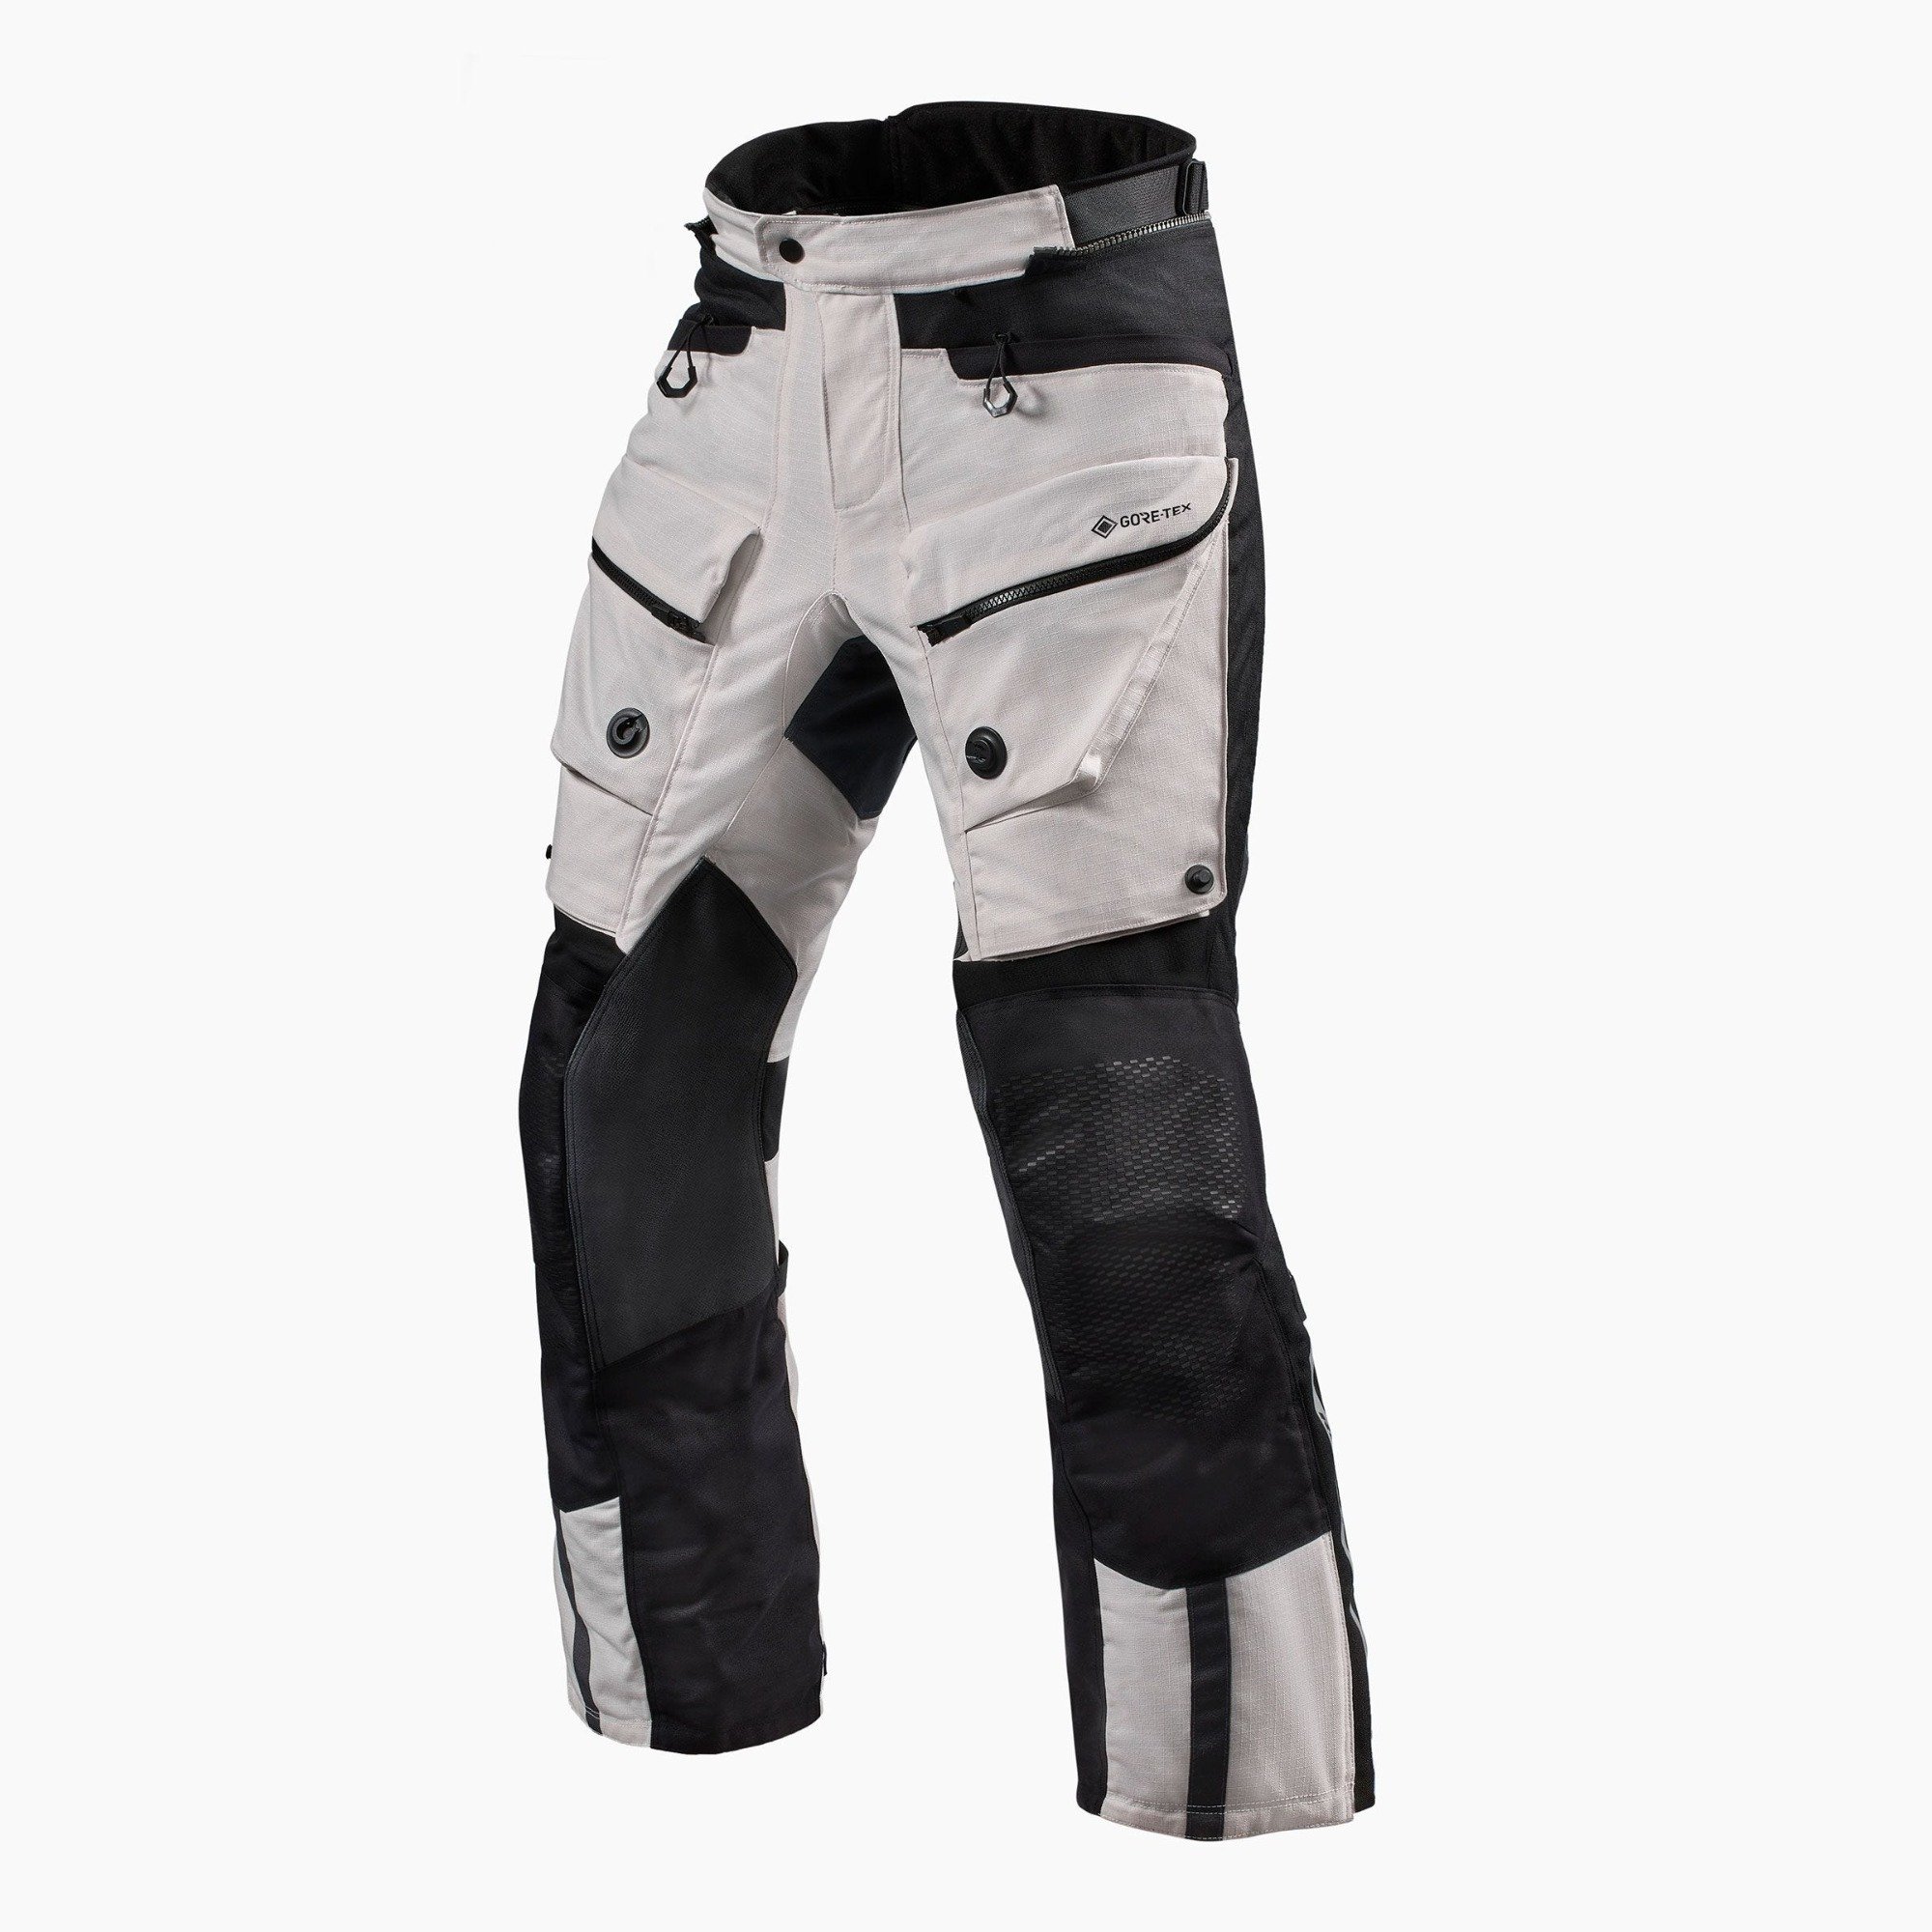 Image of REV'IT! Trousers Defender 3 GTX Silver Black Short Motorcycle Pants Size 2XL ID 8700001320023